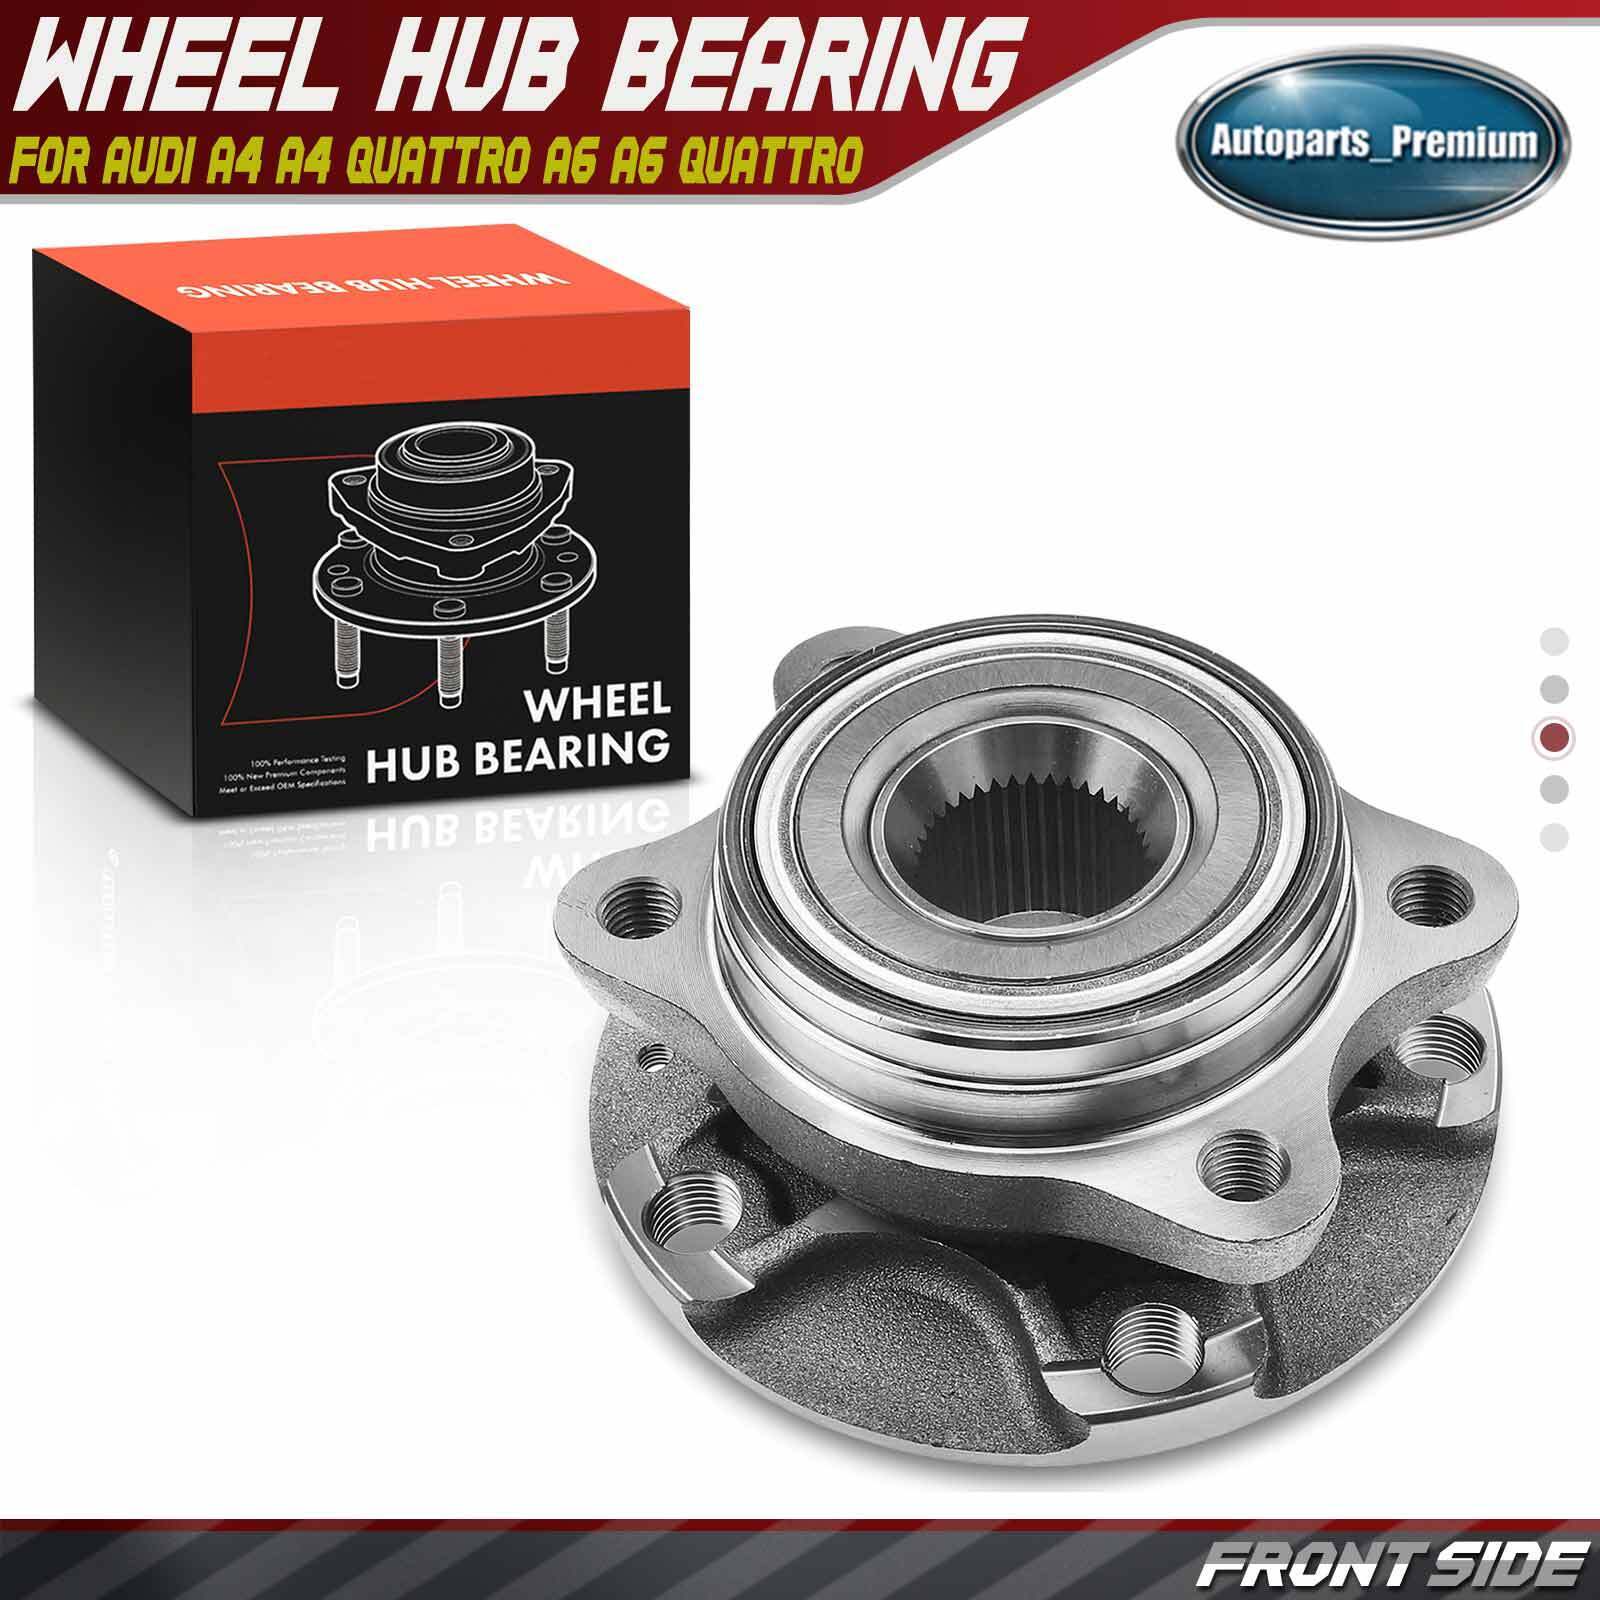 New Front or Rear Wheel Hub Bearing Assembly for Audi A4 A4 Quattro A6 Quattro